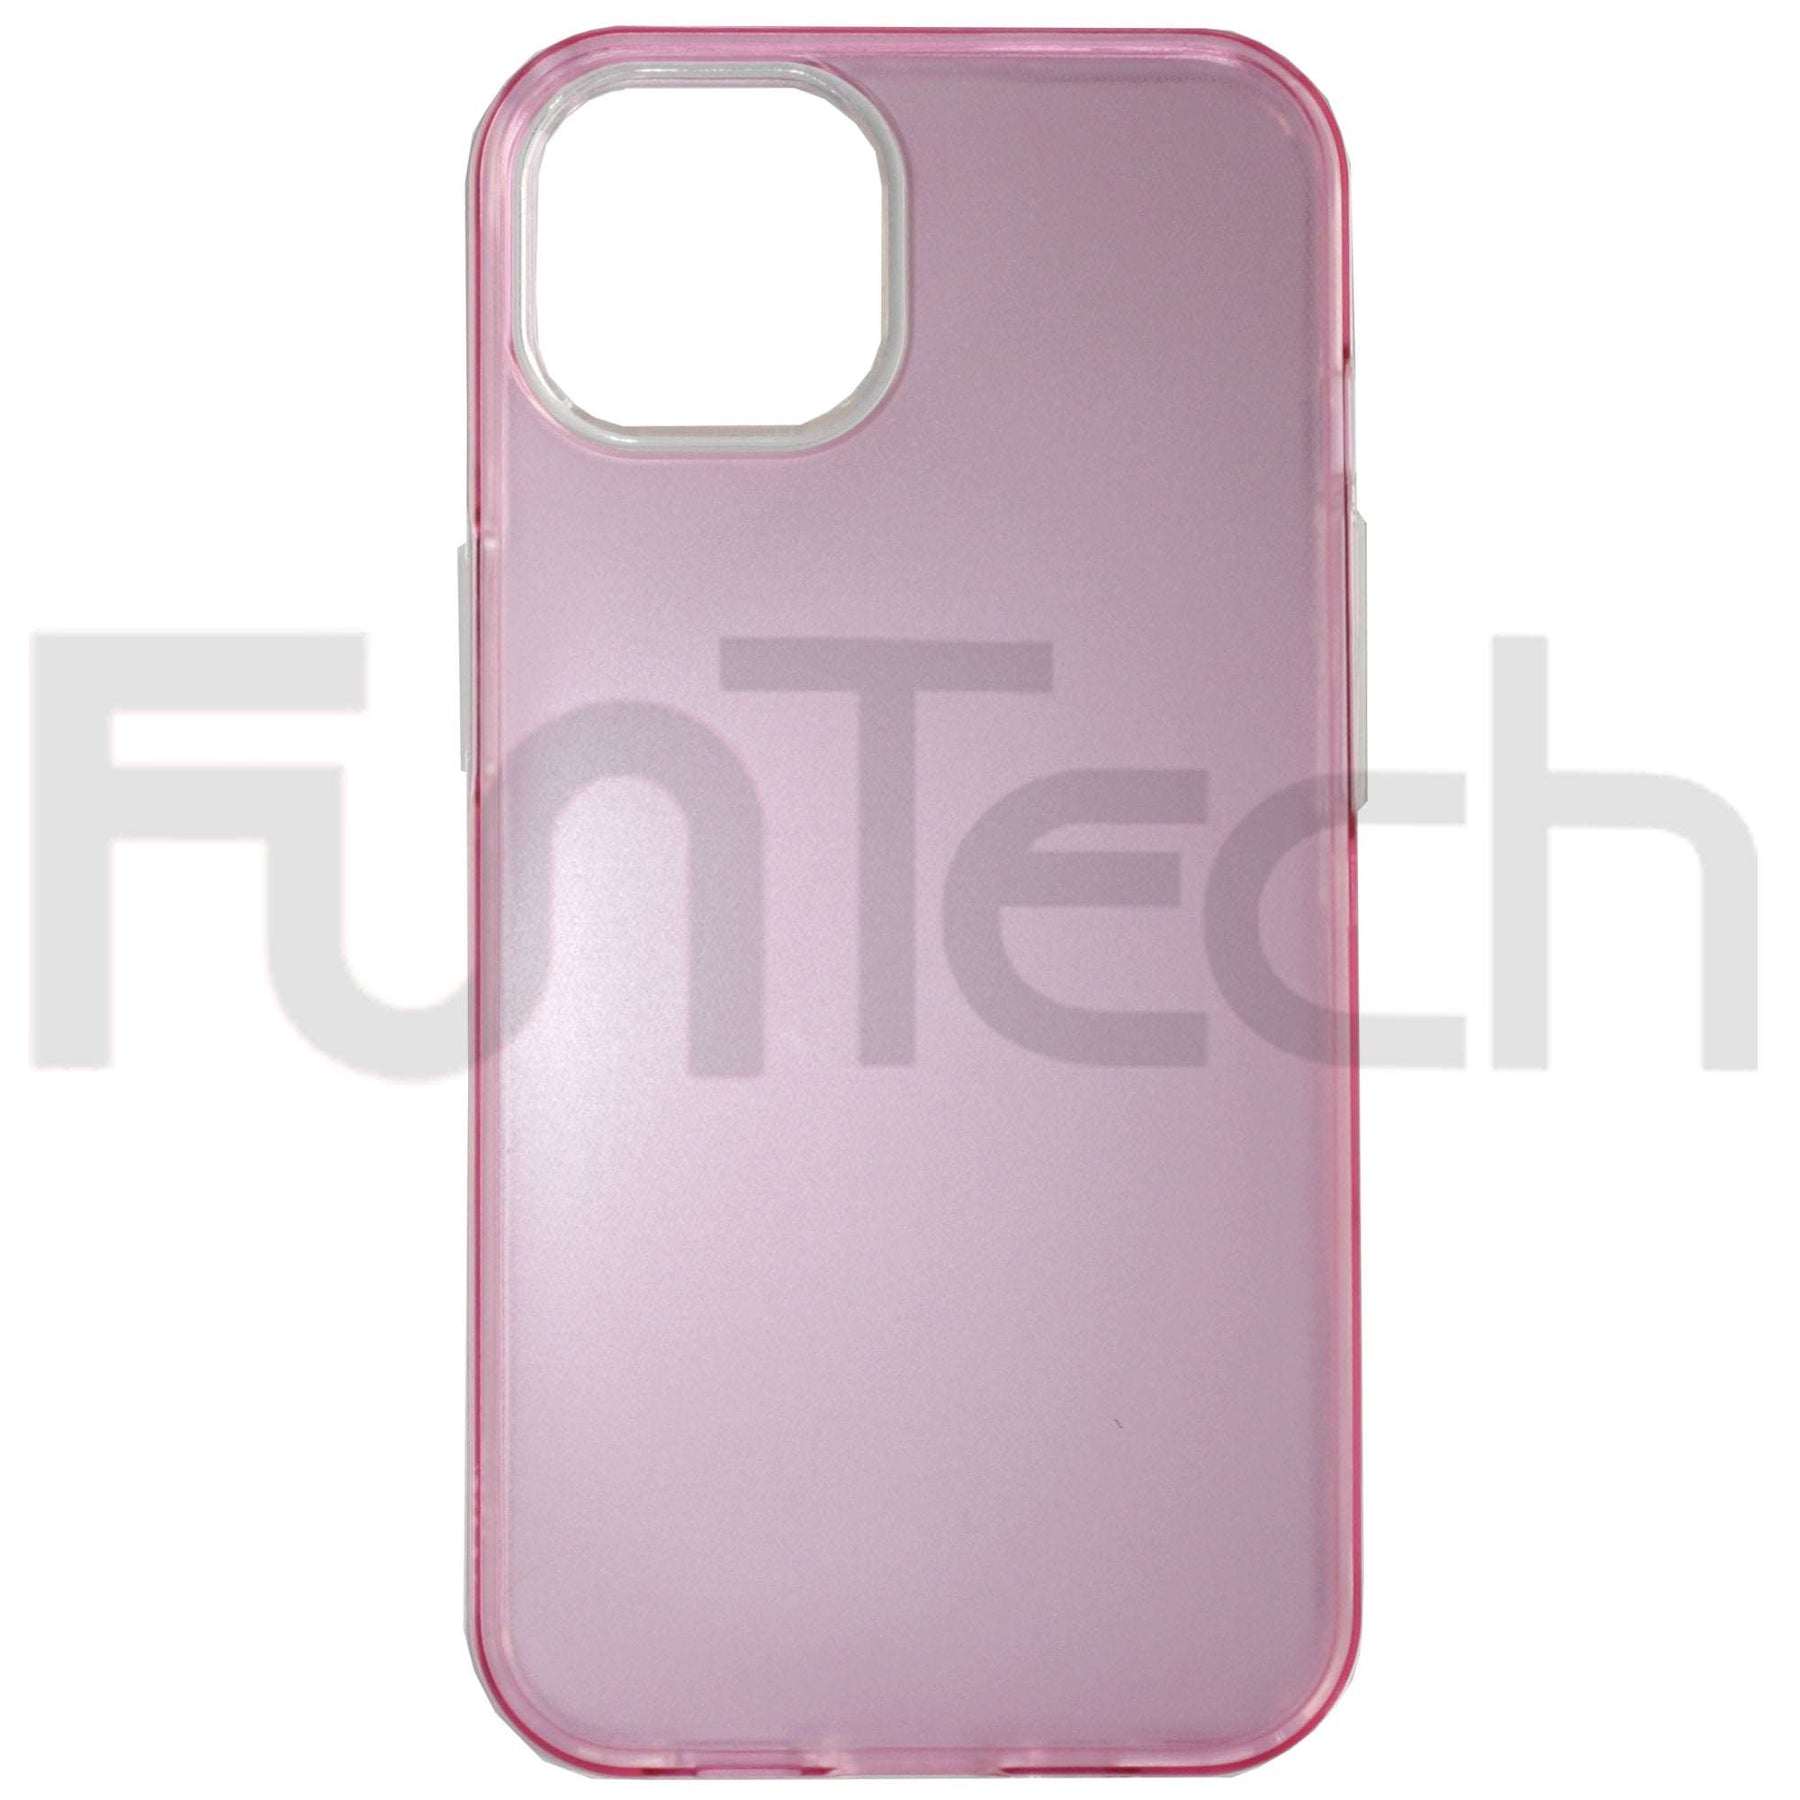 Apple iPhone 13 Pro Max, Double Sided Frosted Surface, Phone Case, Color Pink.